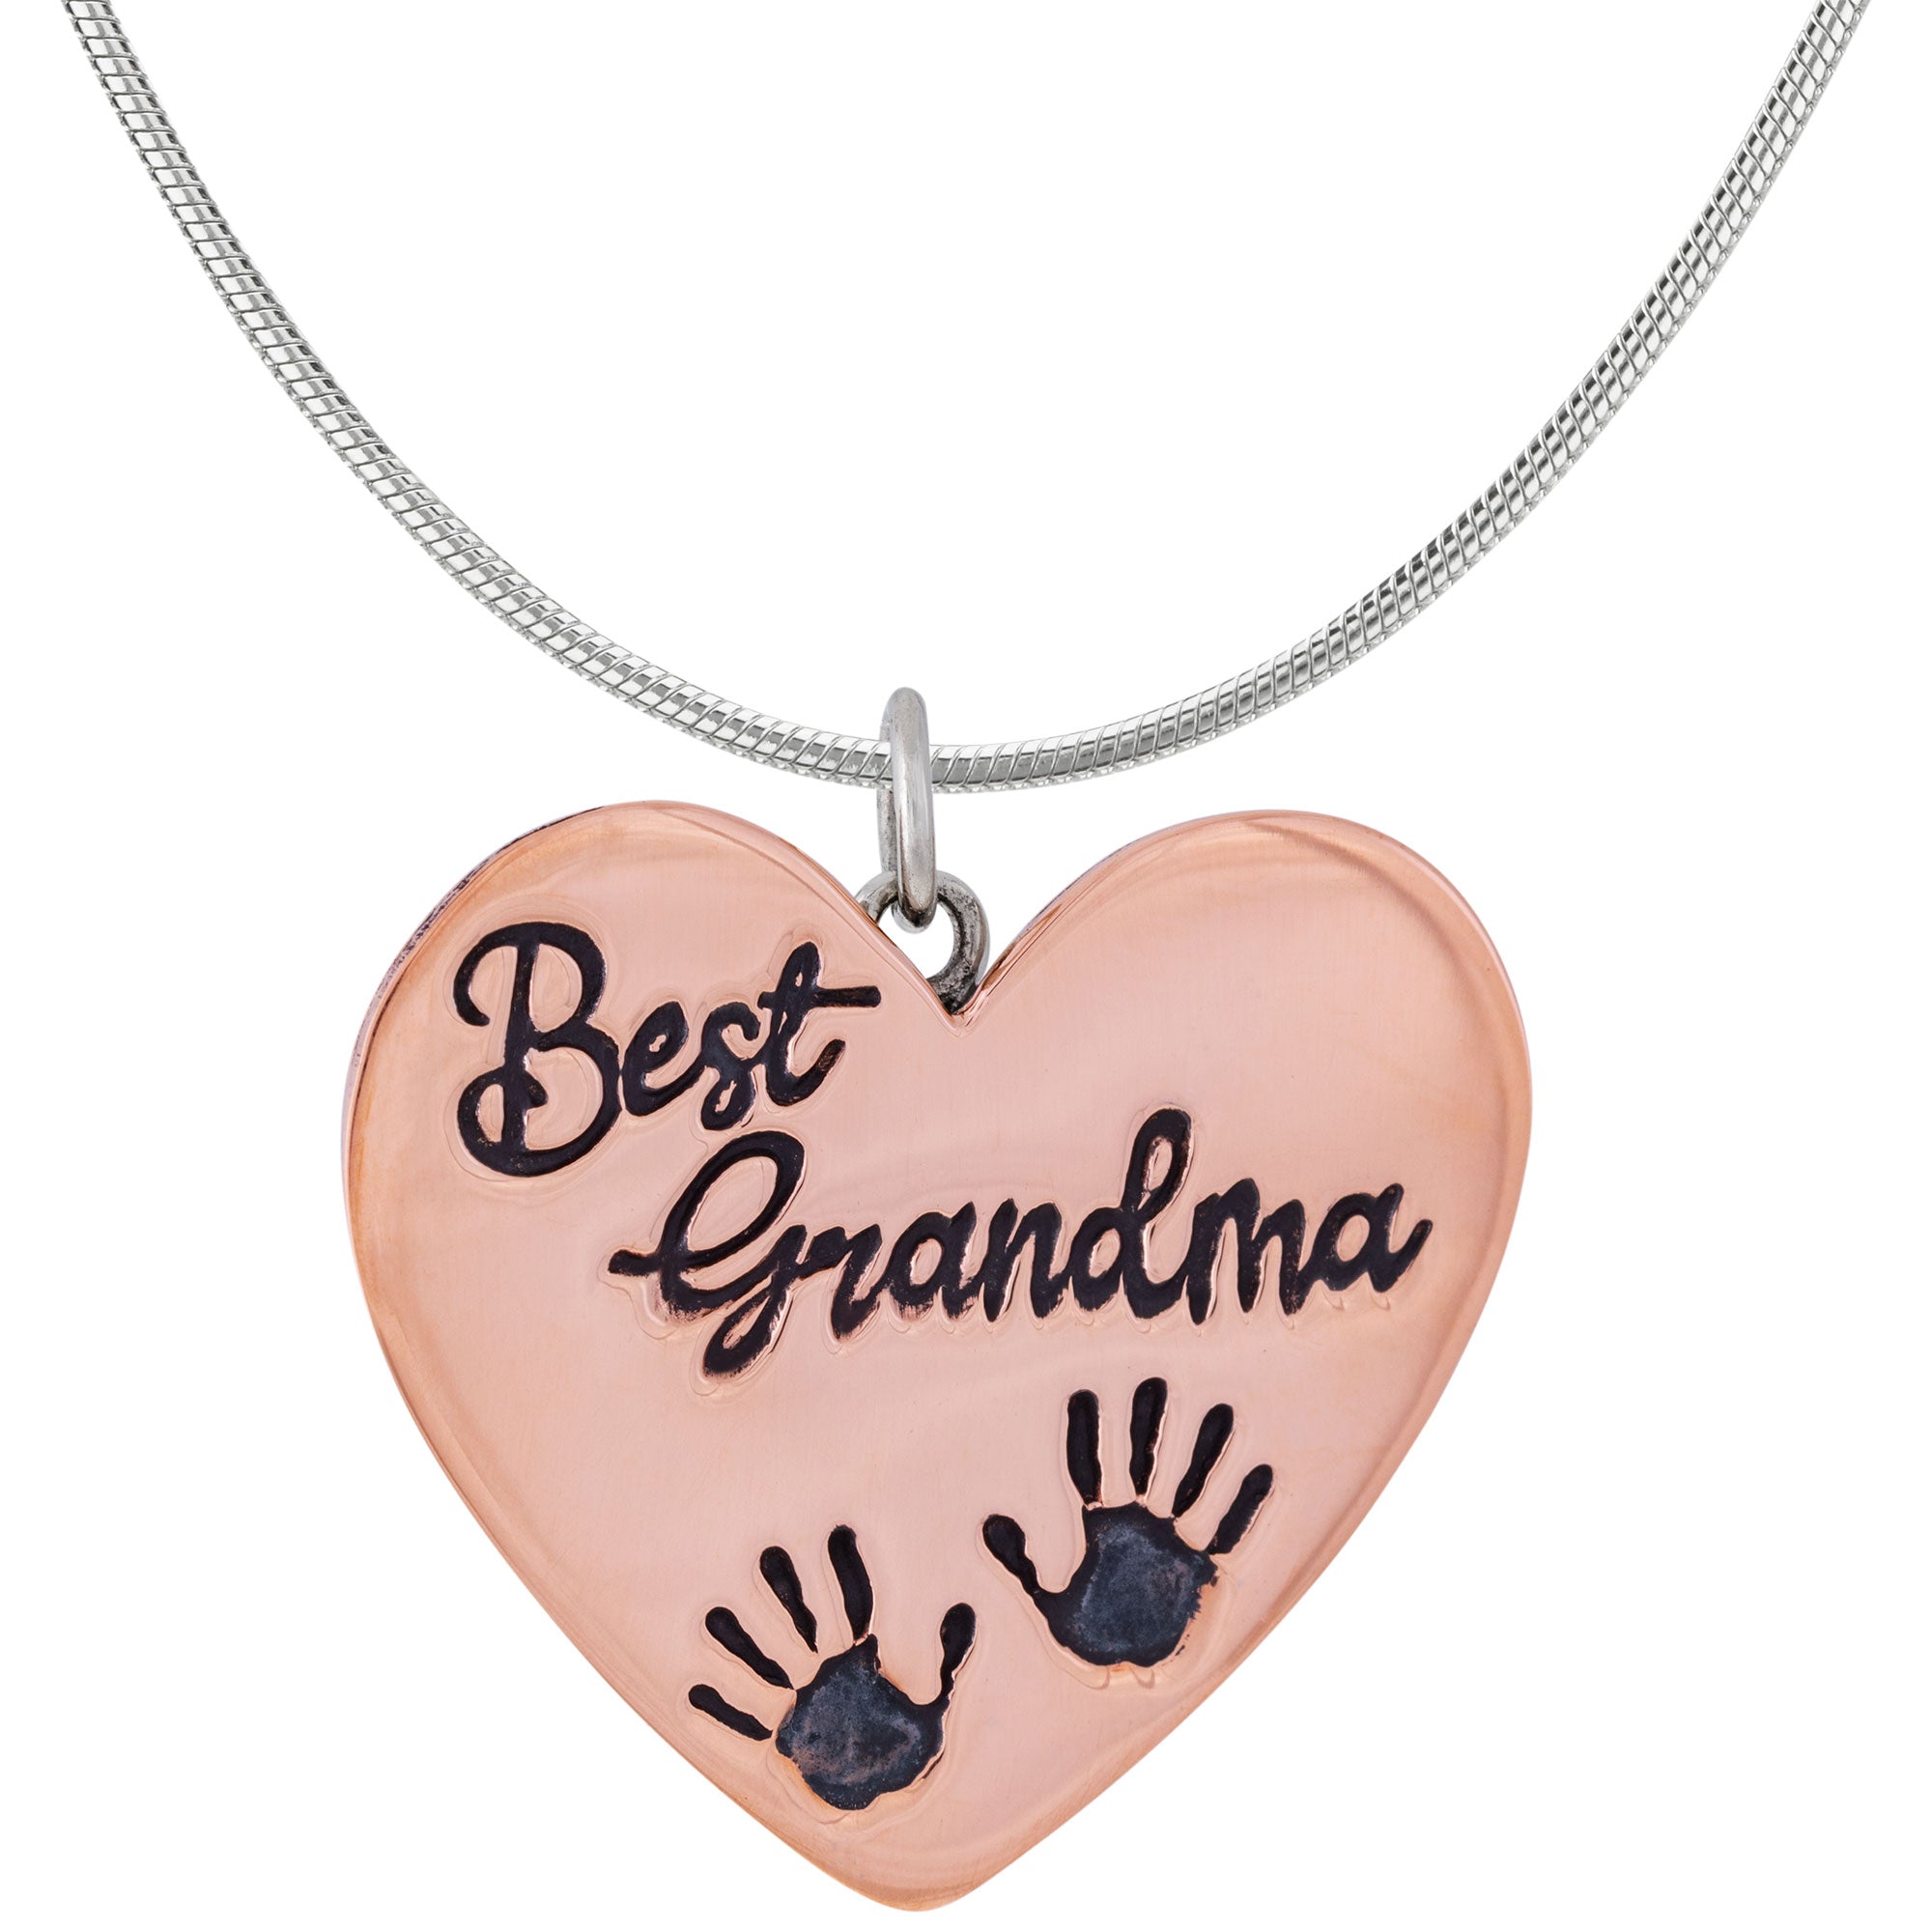 Best Grandma Mixed Metal Necklace - Hands - With Rhodium Plated Chain